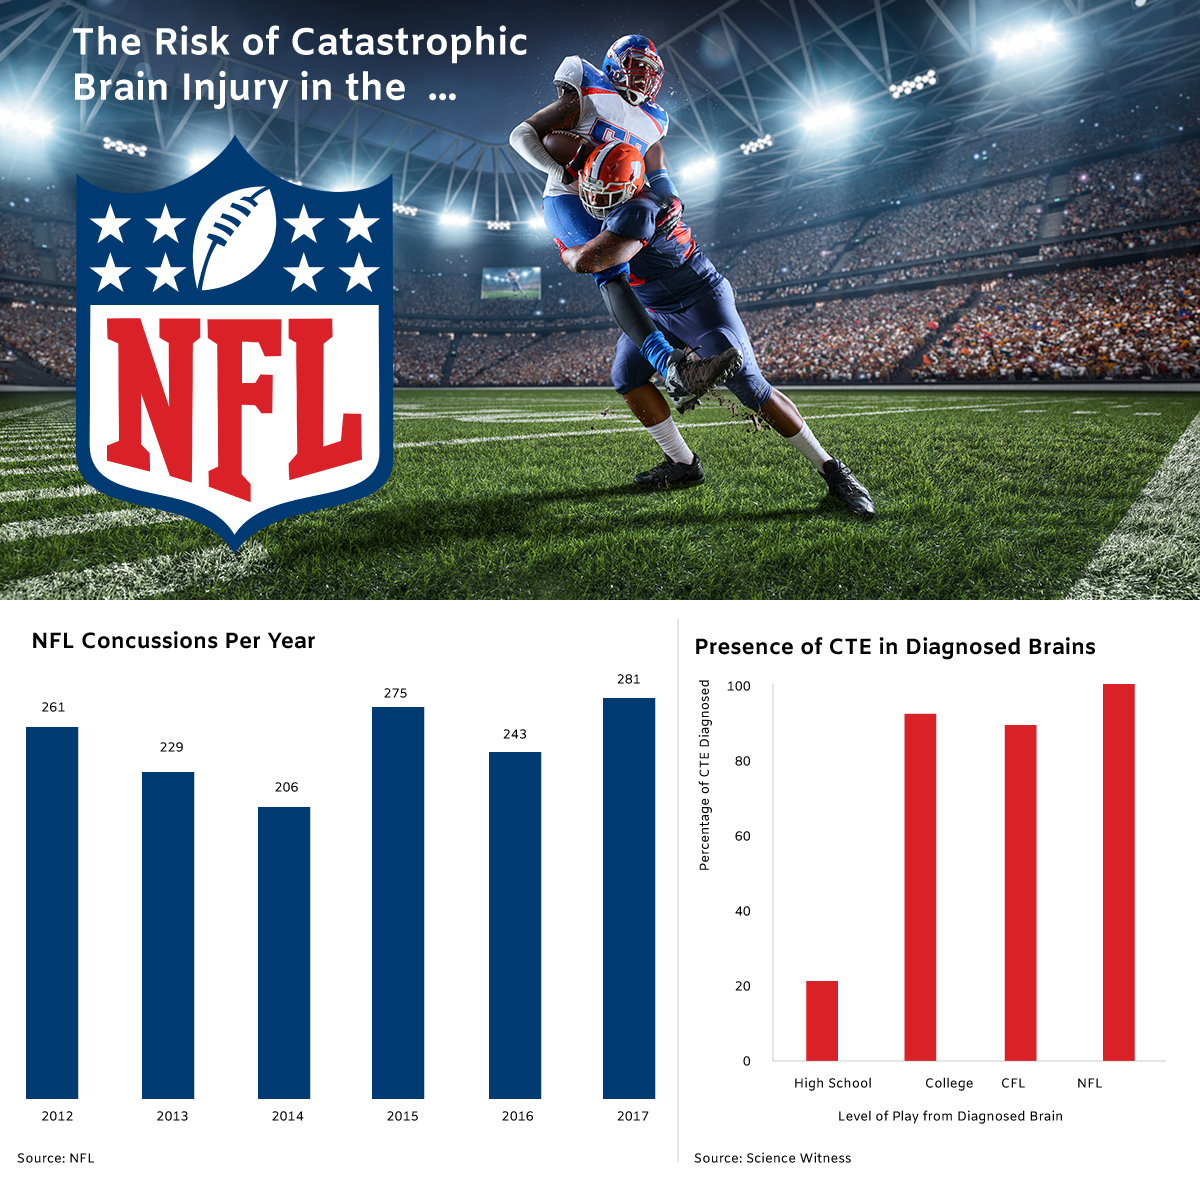 The Risk of Catastrophic Brain Injury in the NFL Infographic